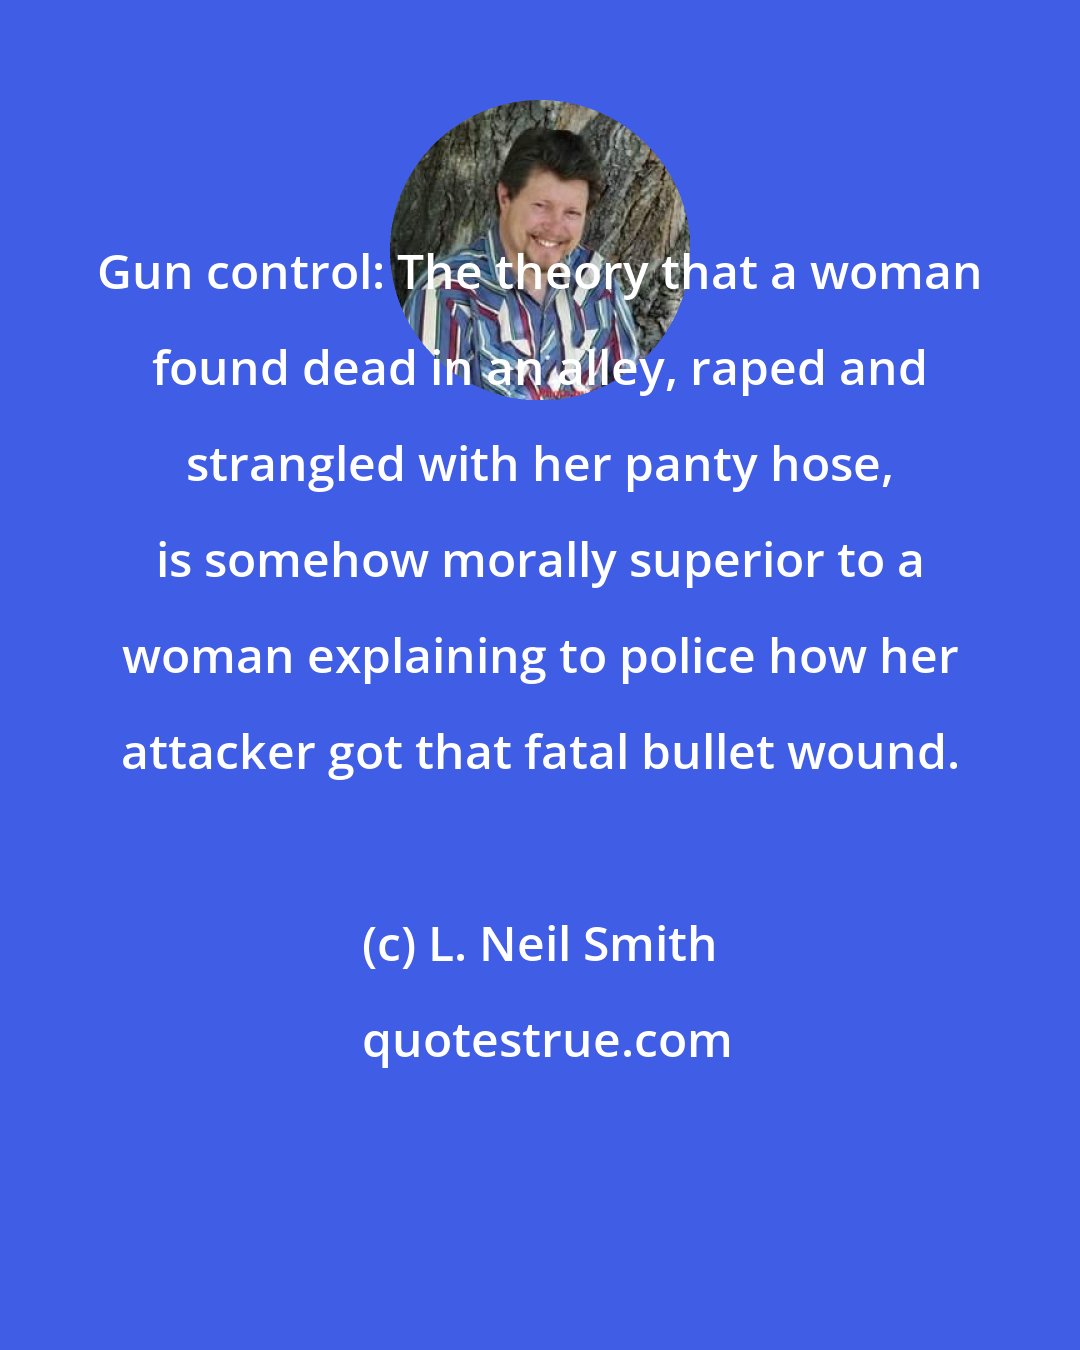 L. Neil Smith: Gun control: The theory that a woman found dead in an alley, raped and strangled with her panty hose, is somehow morally superior to a woman explaining to police how her attacker got that fatal bullet wound.